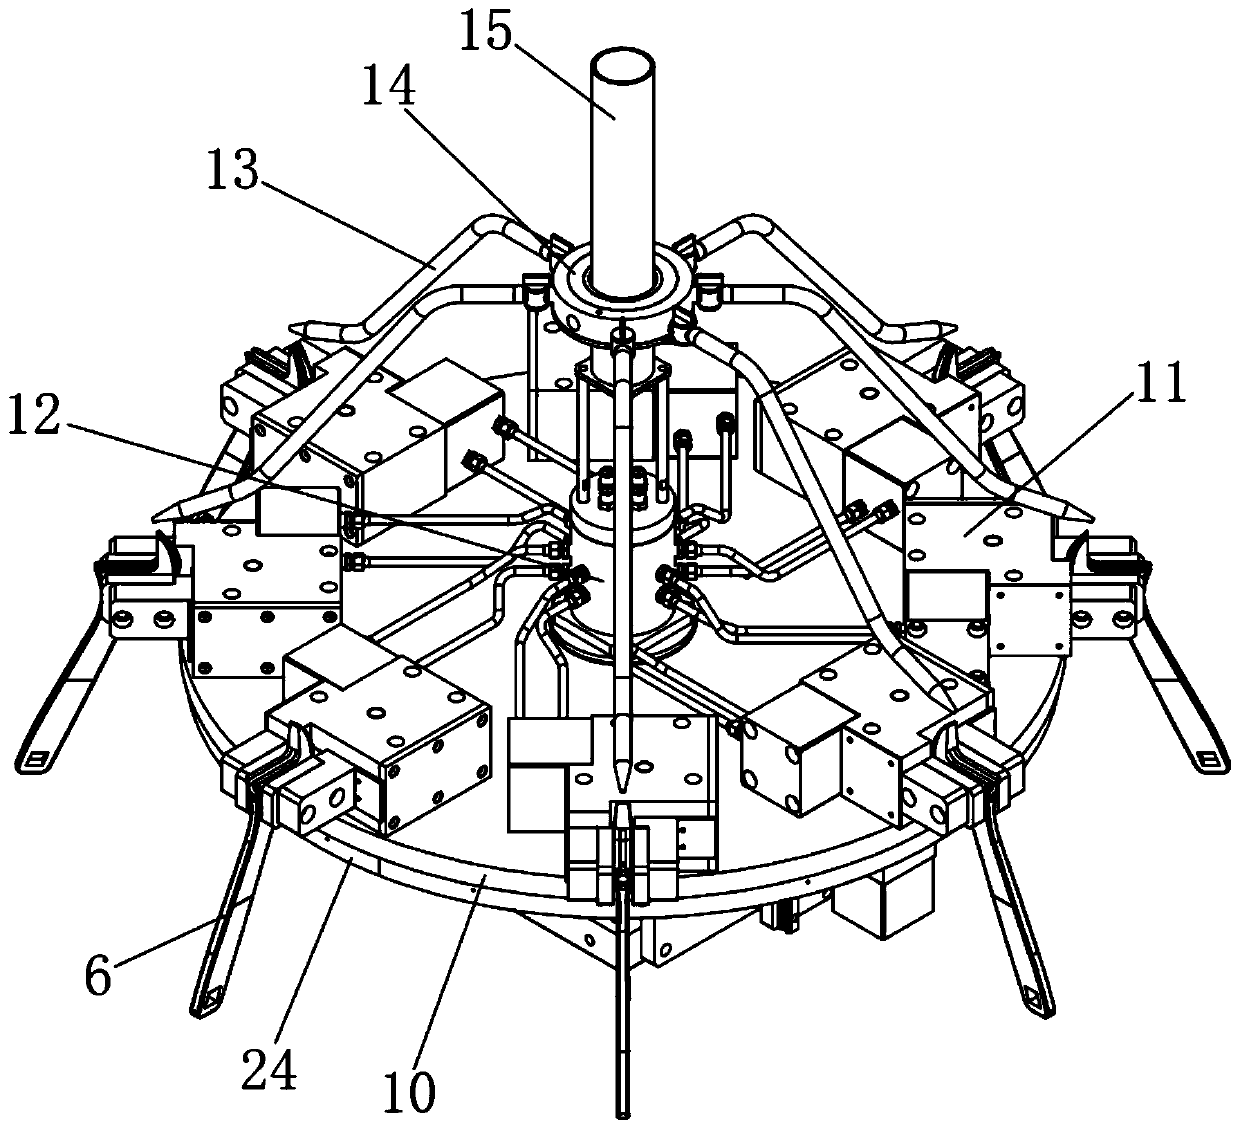 Composite processing device for a movable wrench